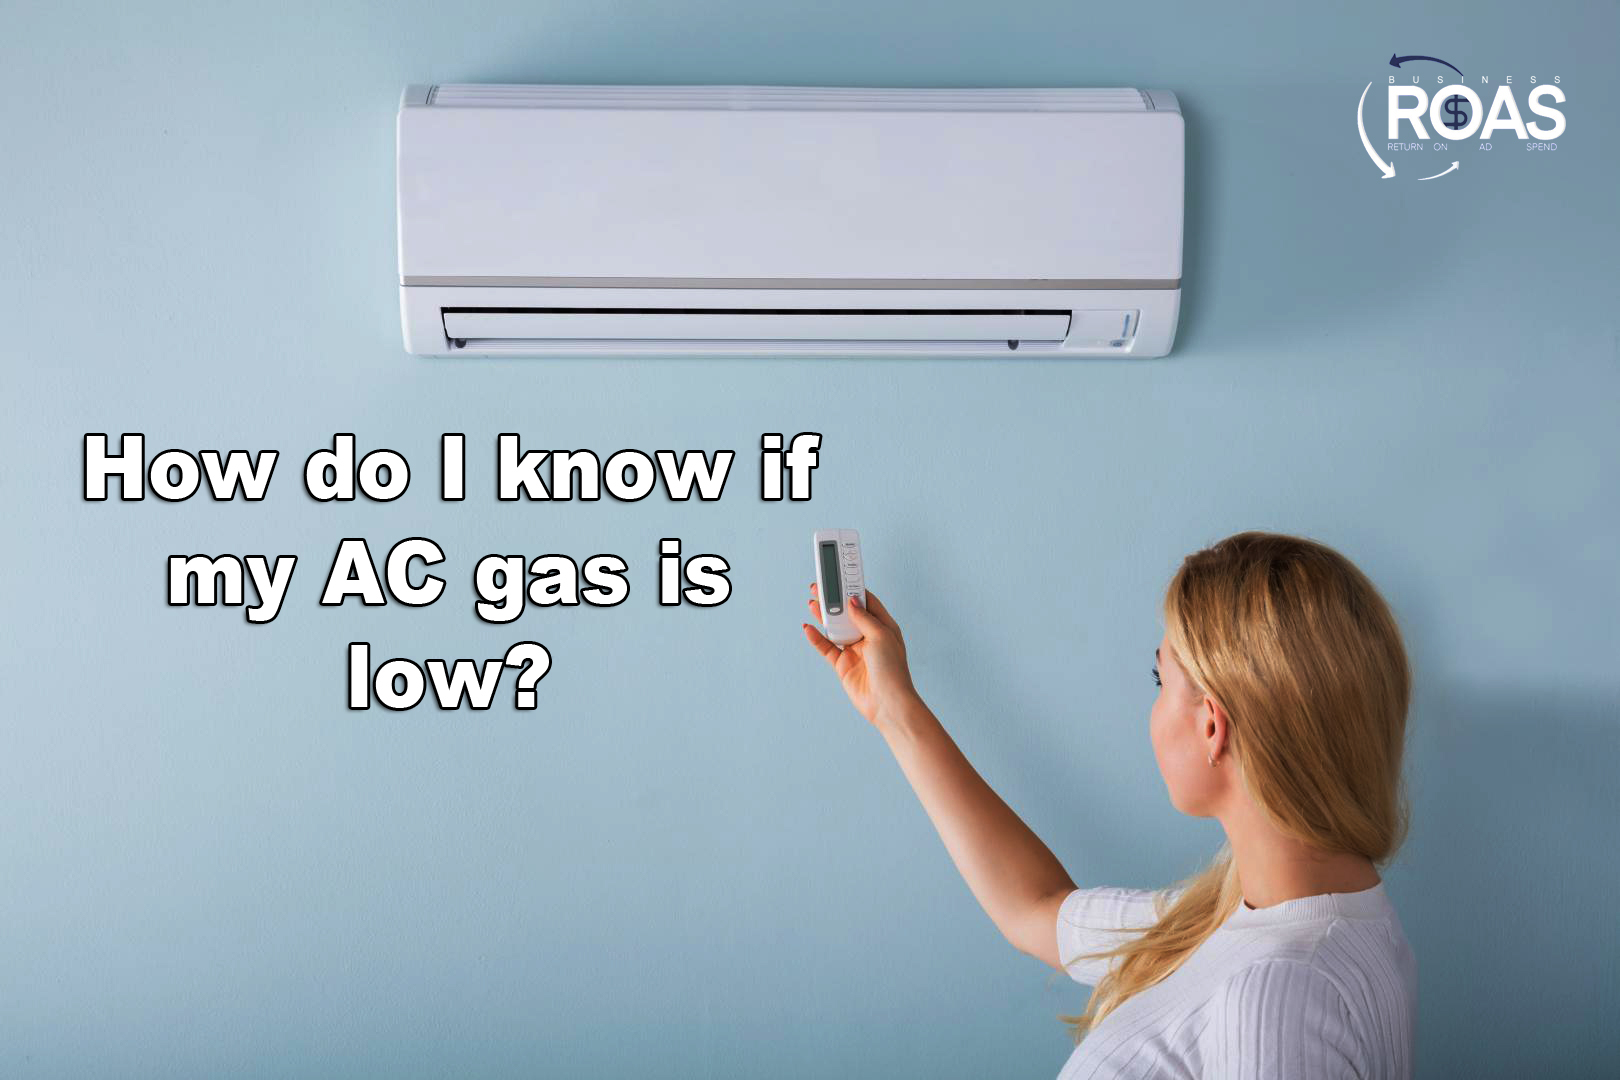 How do I know if my AC gas is low